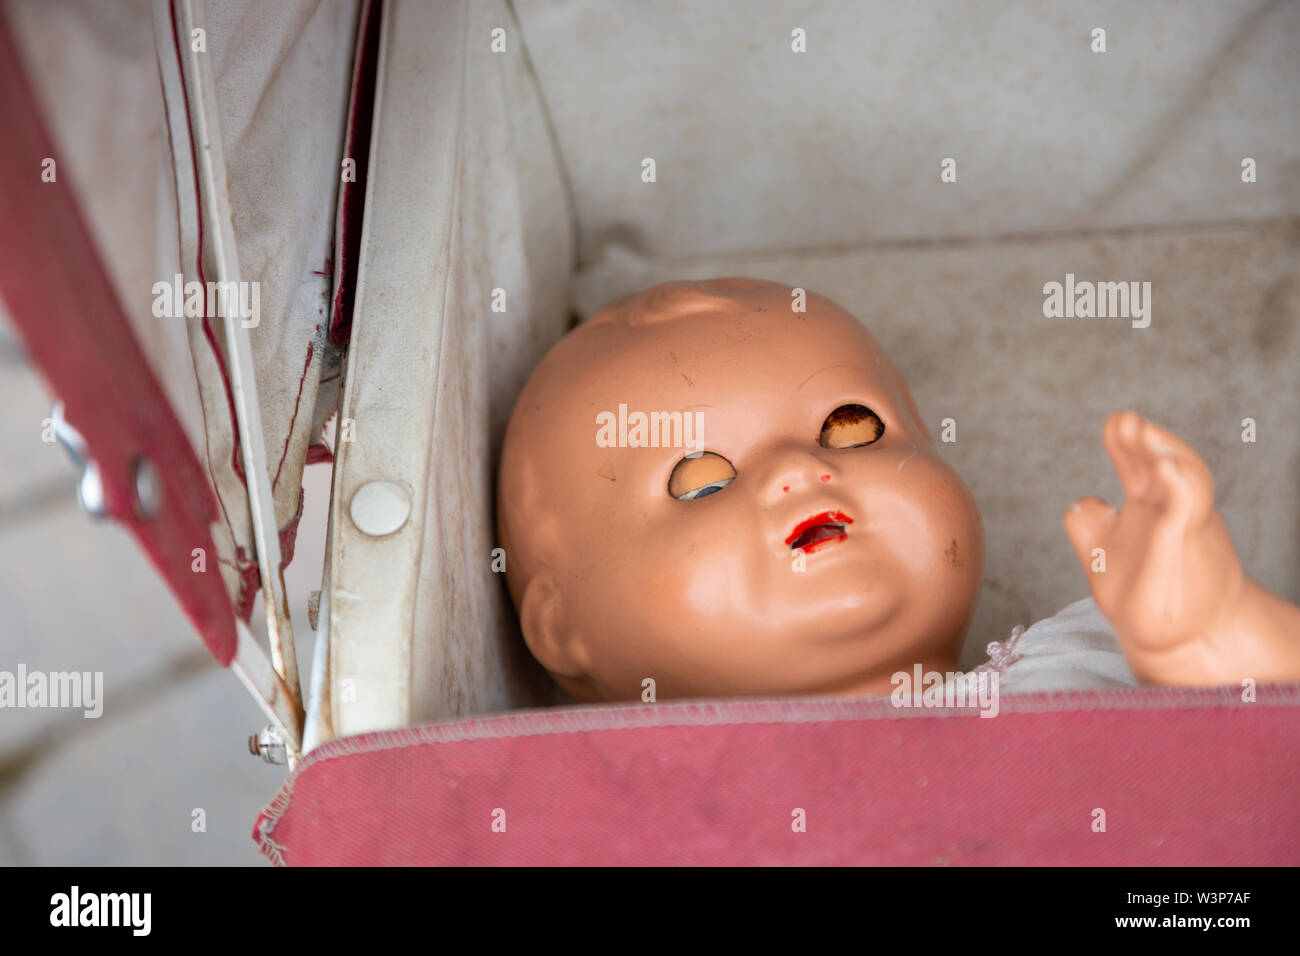 Old fashioned traditional baby doll in a pram Stock Photo